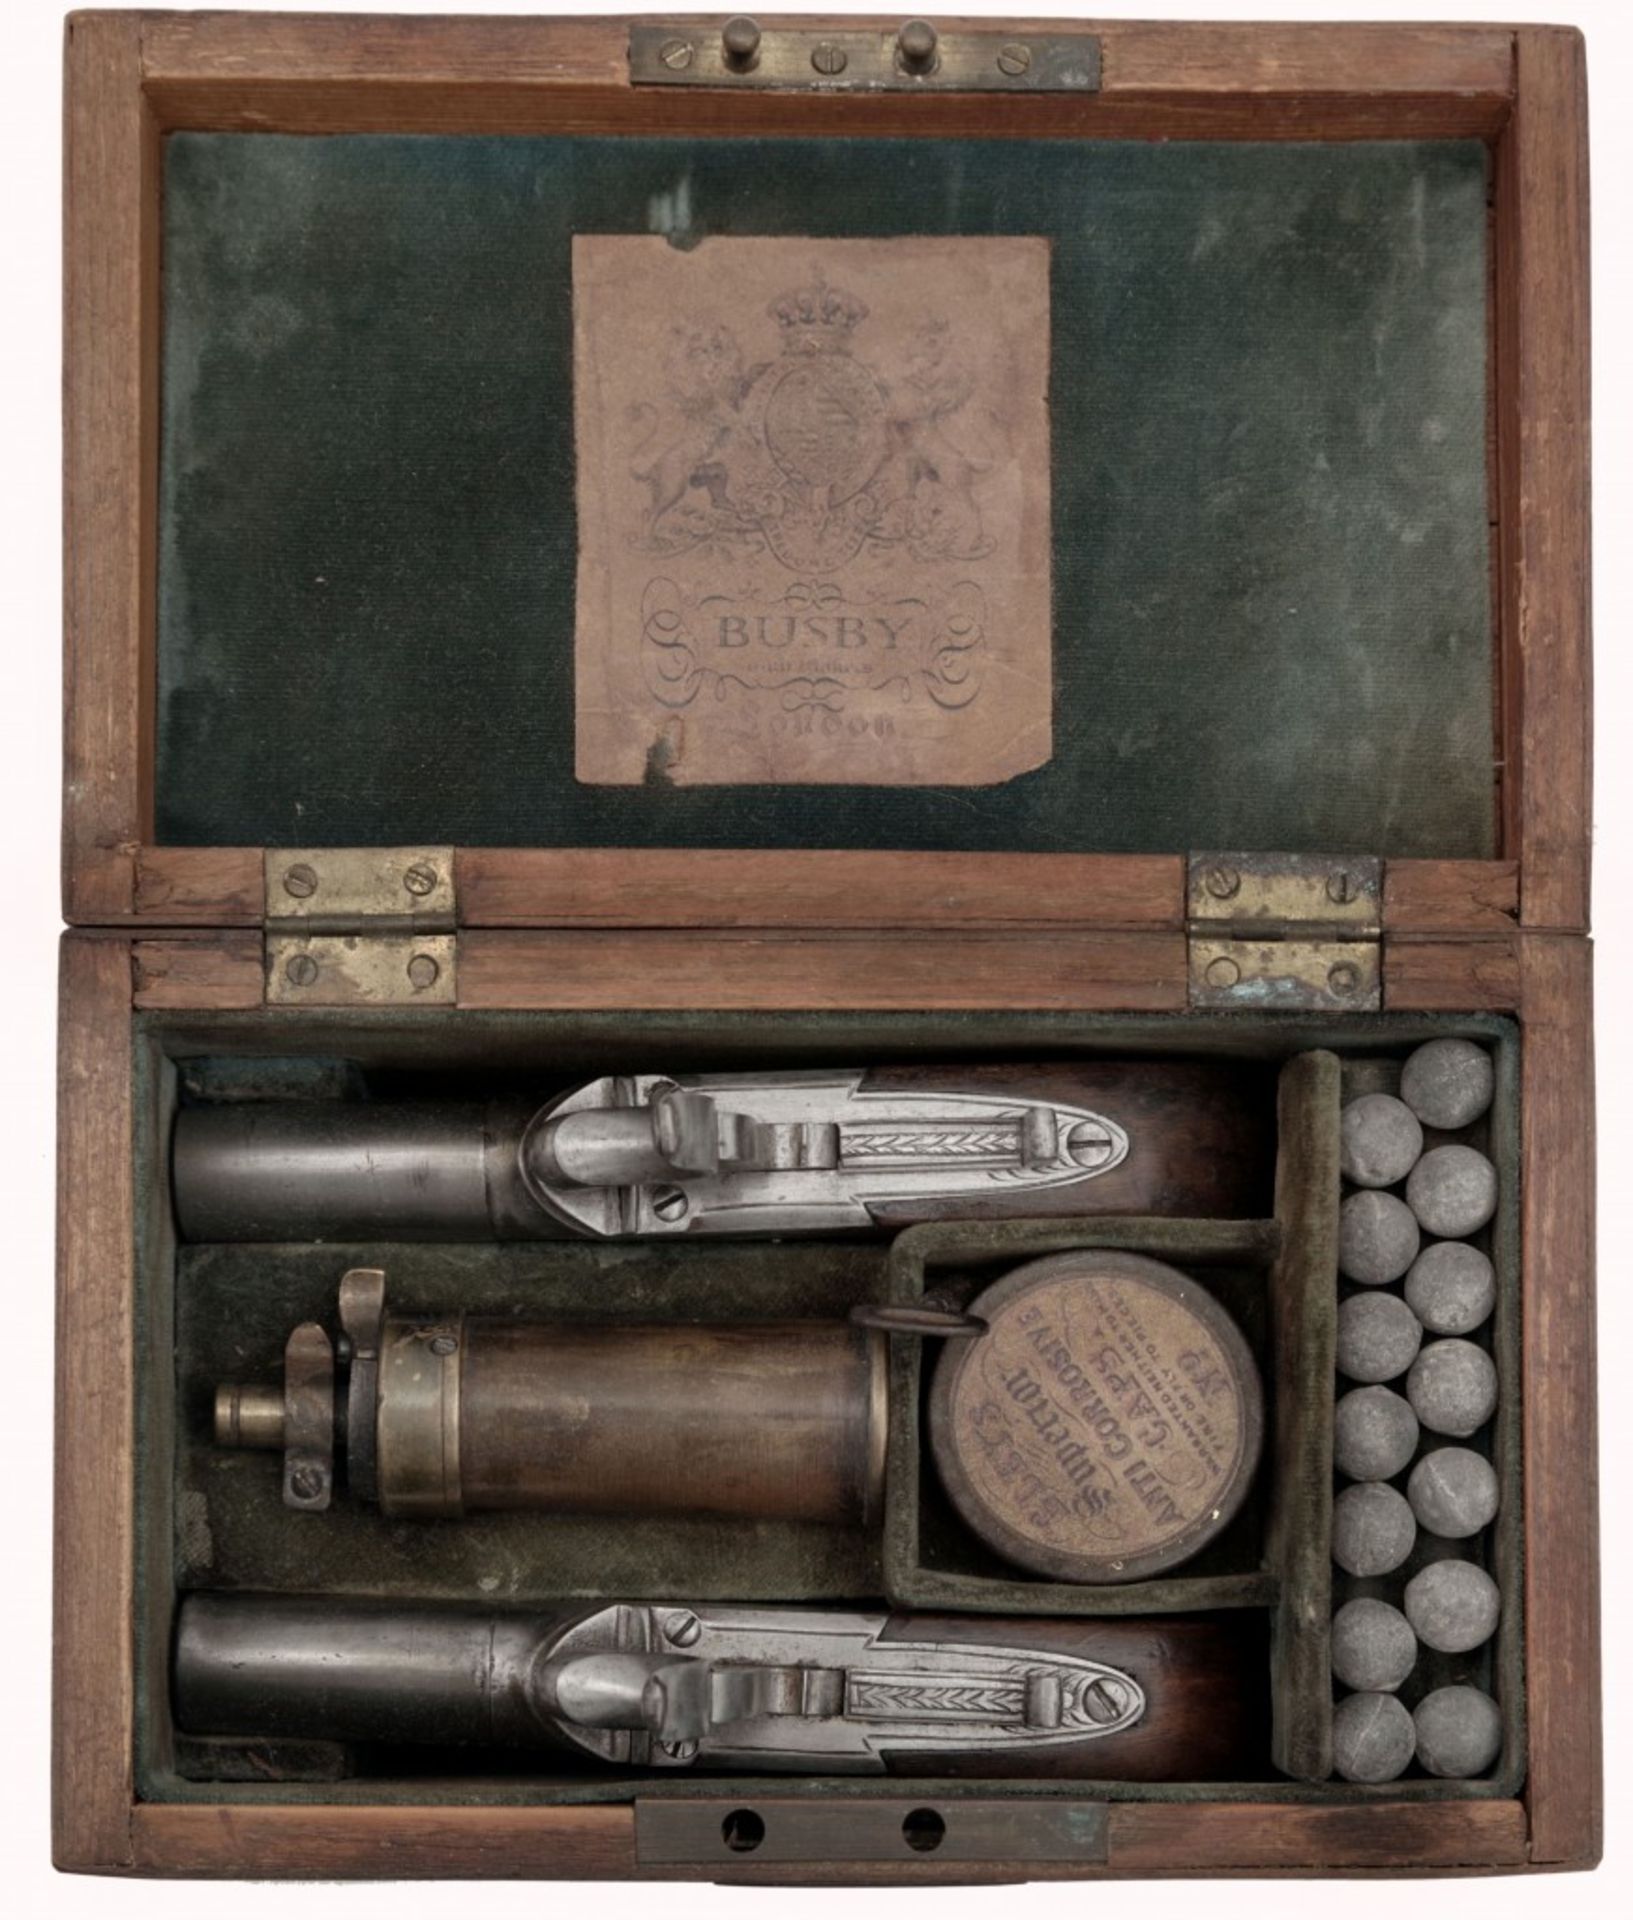 A Pair of Cased Percussion Pocket Pistols by James Busby